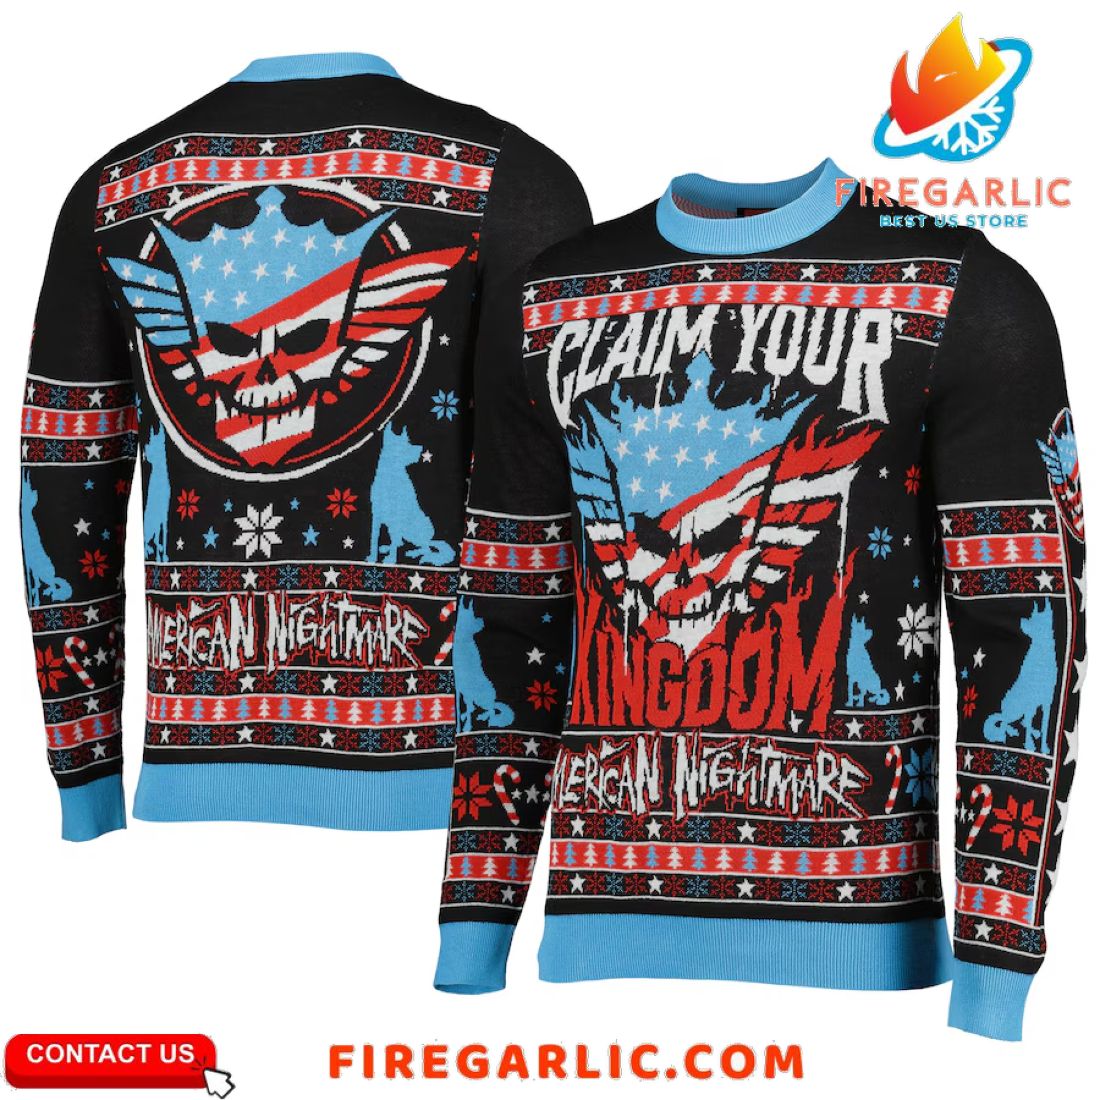 Black Cody Rhodes Claim Your Kingdom Ugly Holiday Sweater